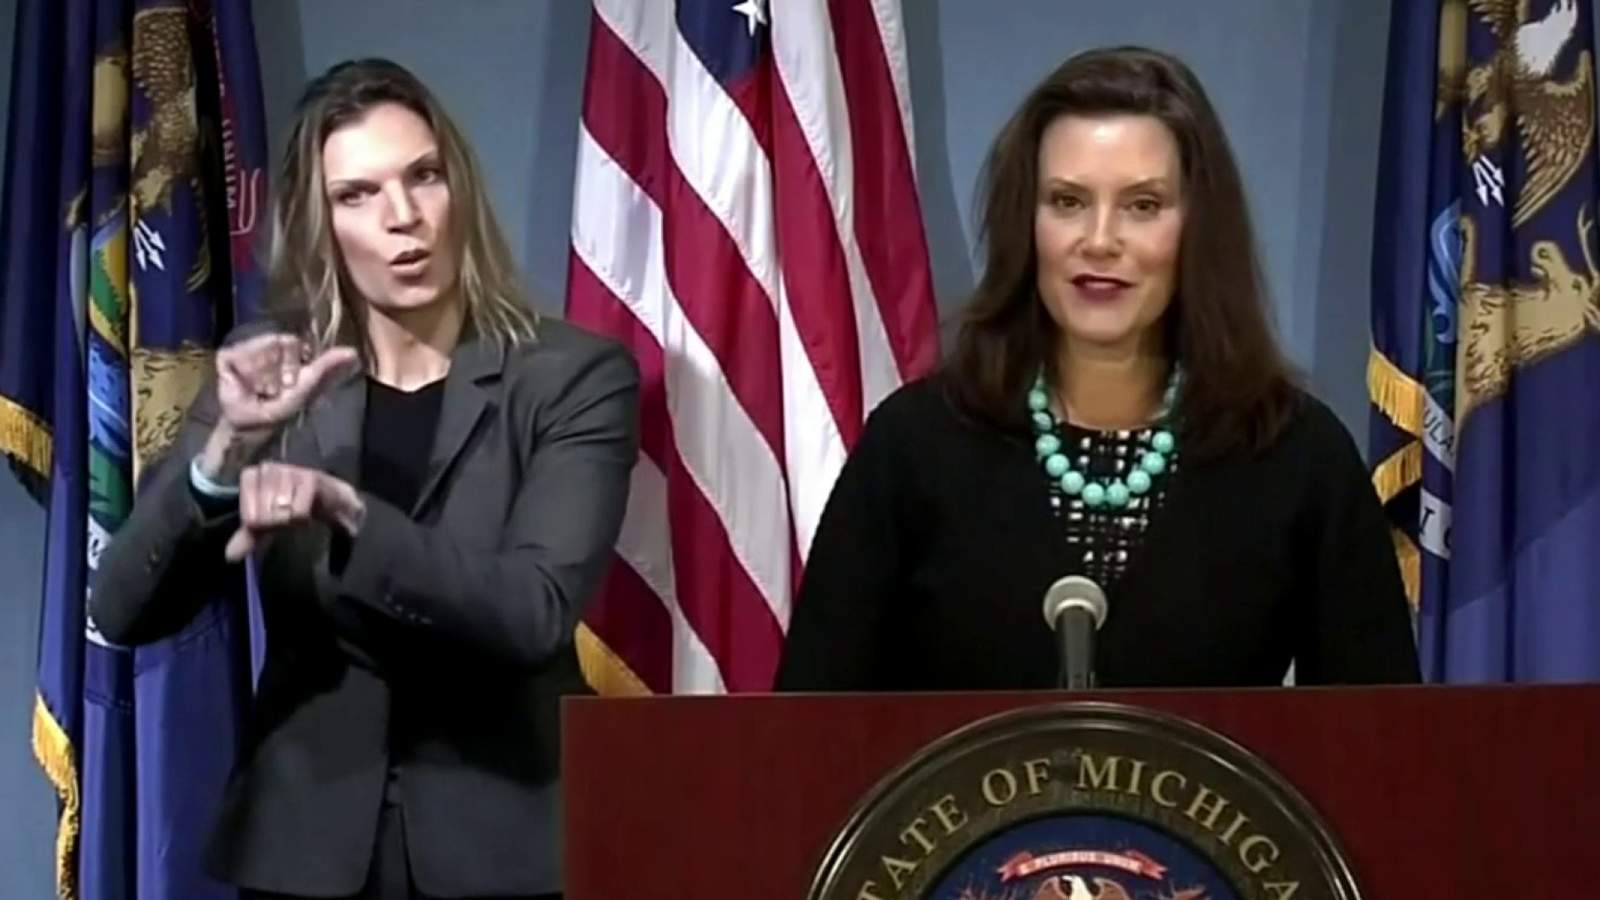 What to know from Michigan Gov. Gretchen Whitmer’s COVID-19 briefing